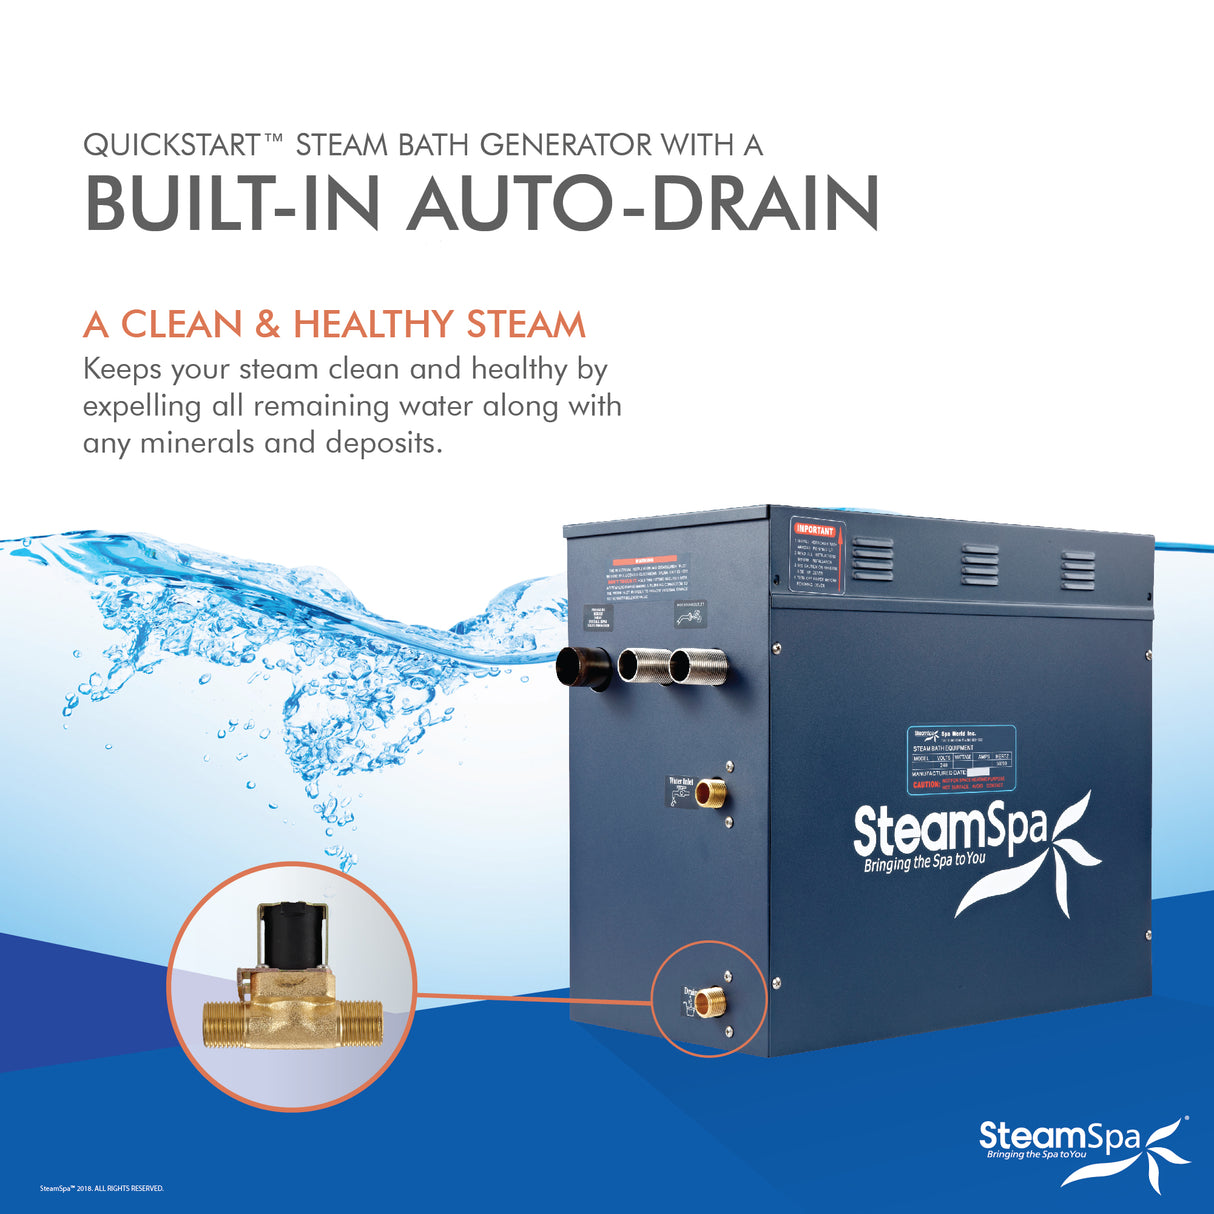 SteamSpa Executive 10.5 KW QuickStart Acu-Steam Bath Generator Package with Built-in Auto Drain and Install Kit in Brushed Nickel | Steam Generator Kit with Dual Control Panel Steamhead 240V | EXT1050BN-A EXT1050BN-A